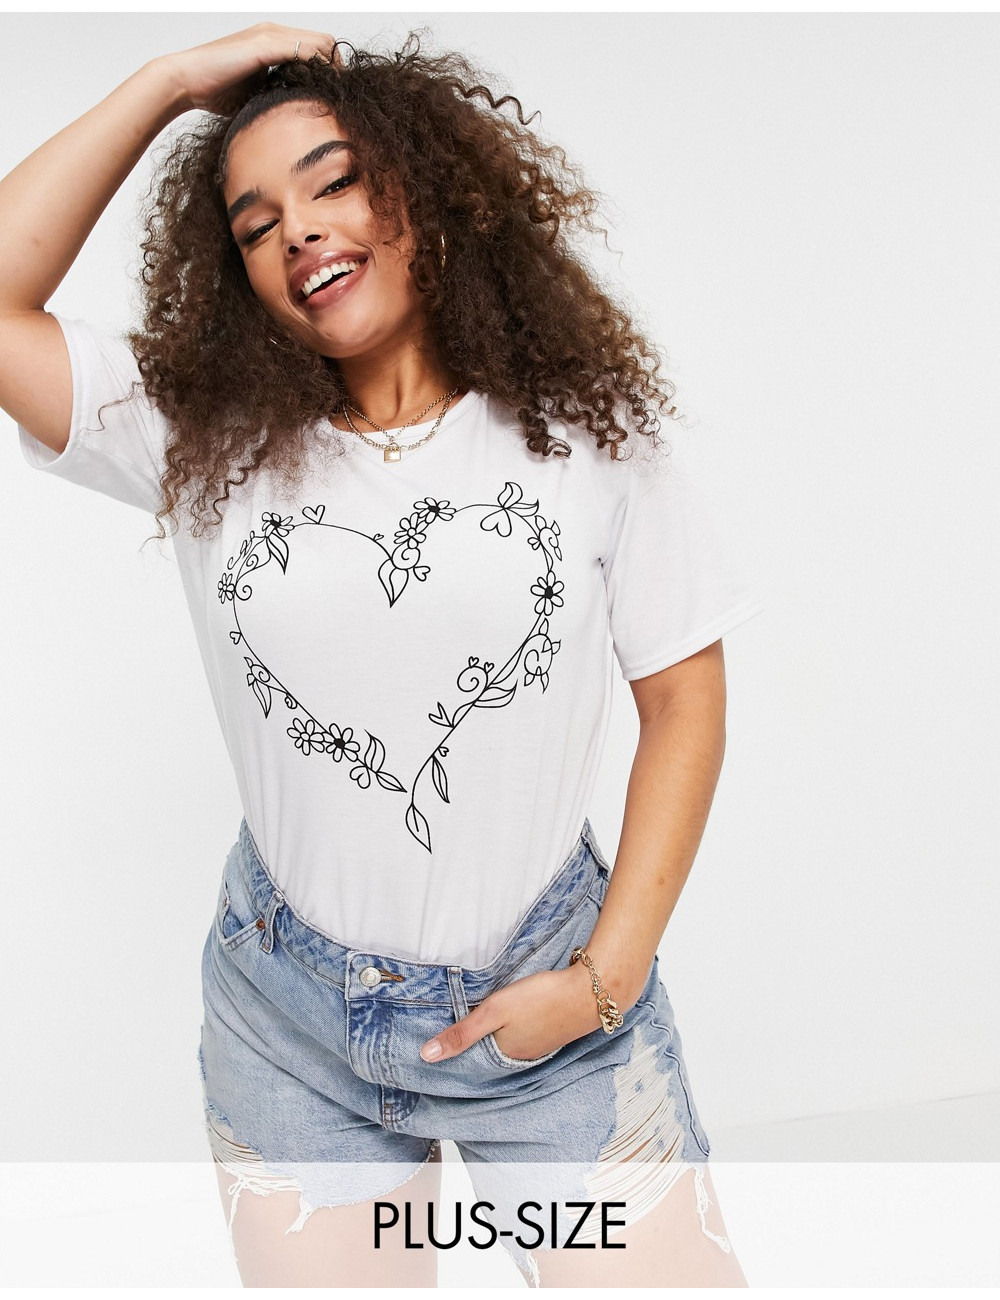 Yours heart print t-shirt...